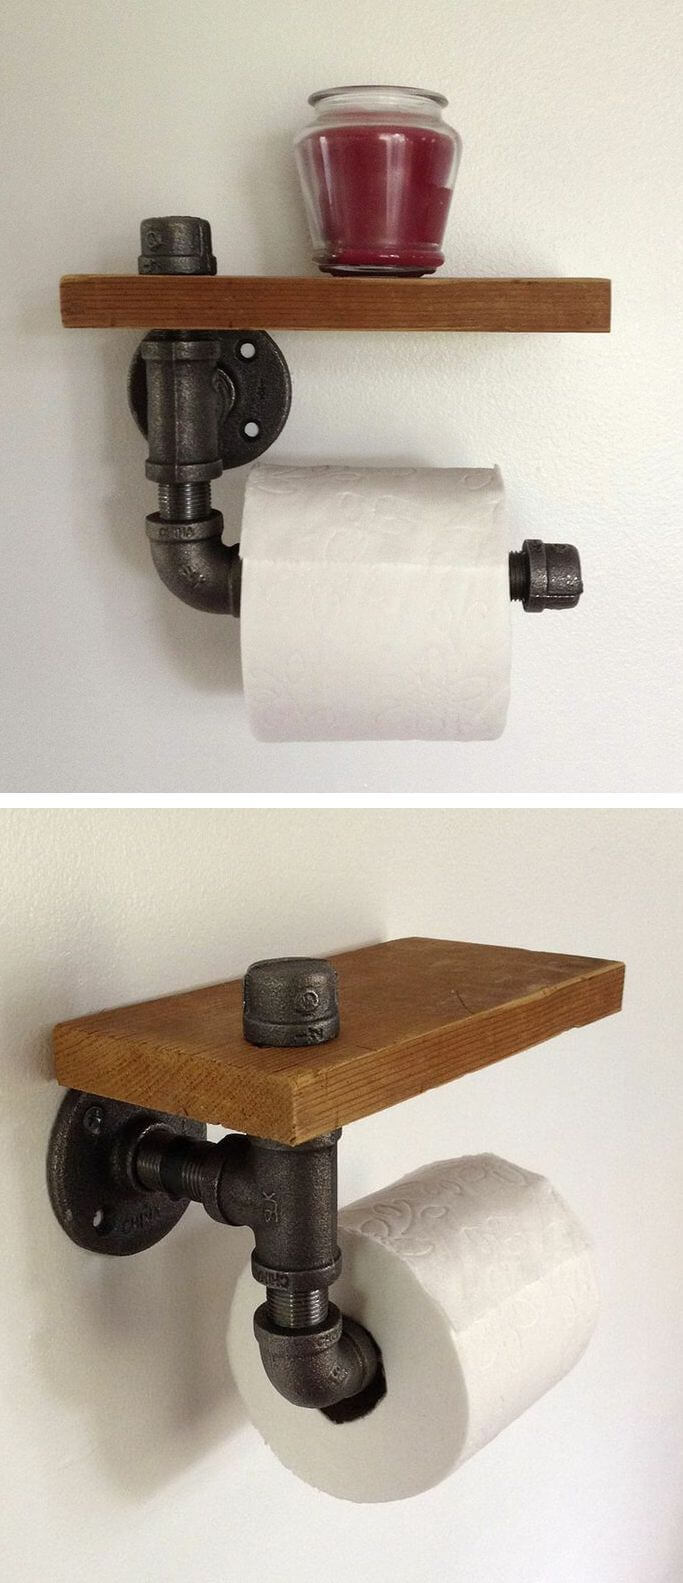 Pipe-fitting Toilet Paper Holder with Shelf